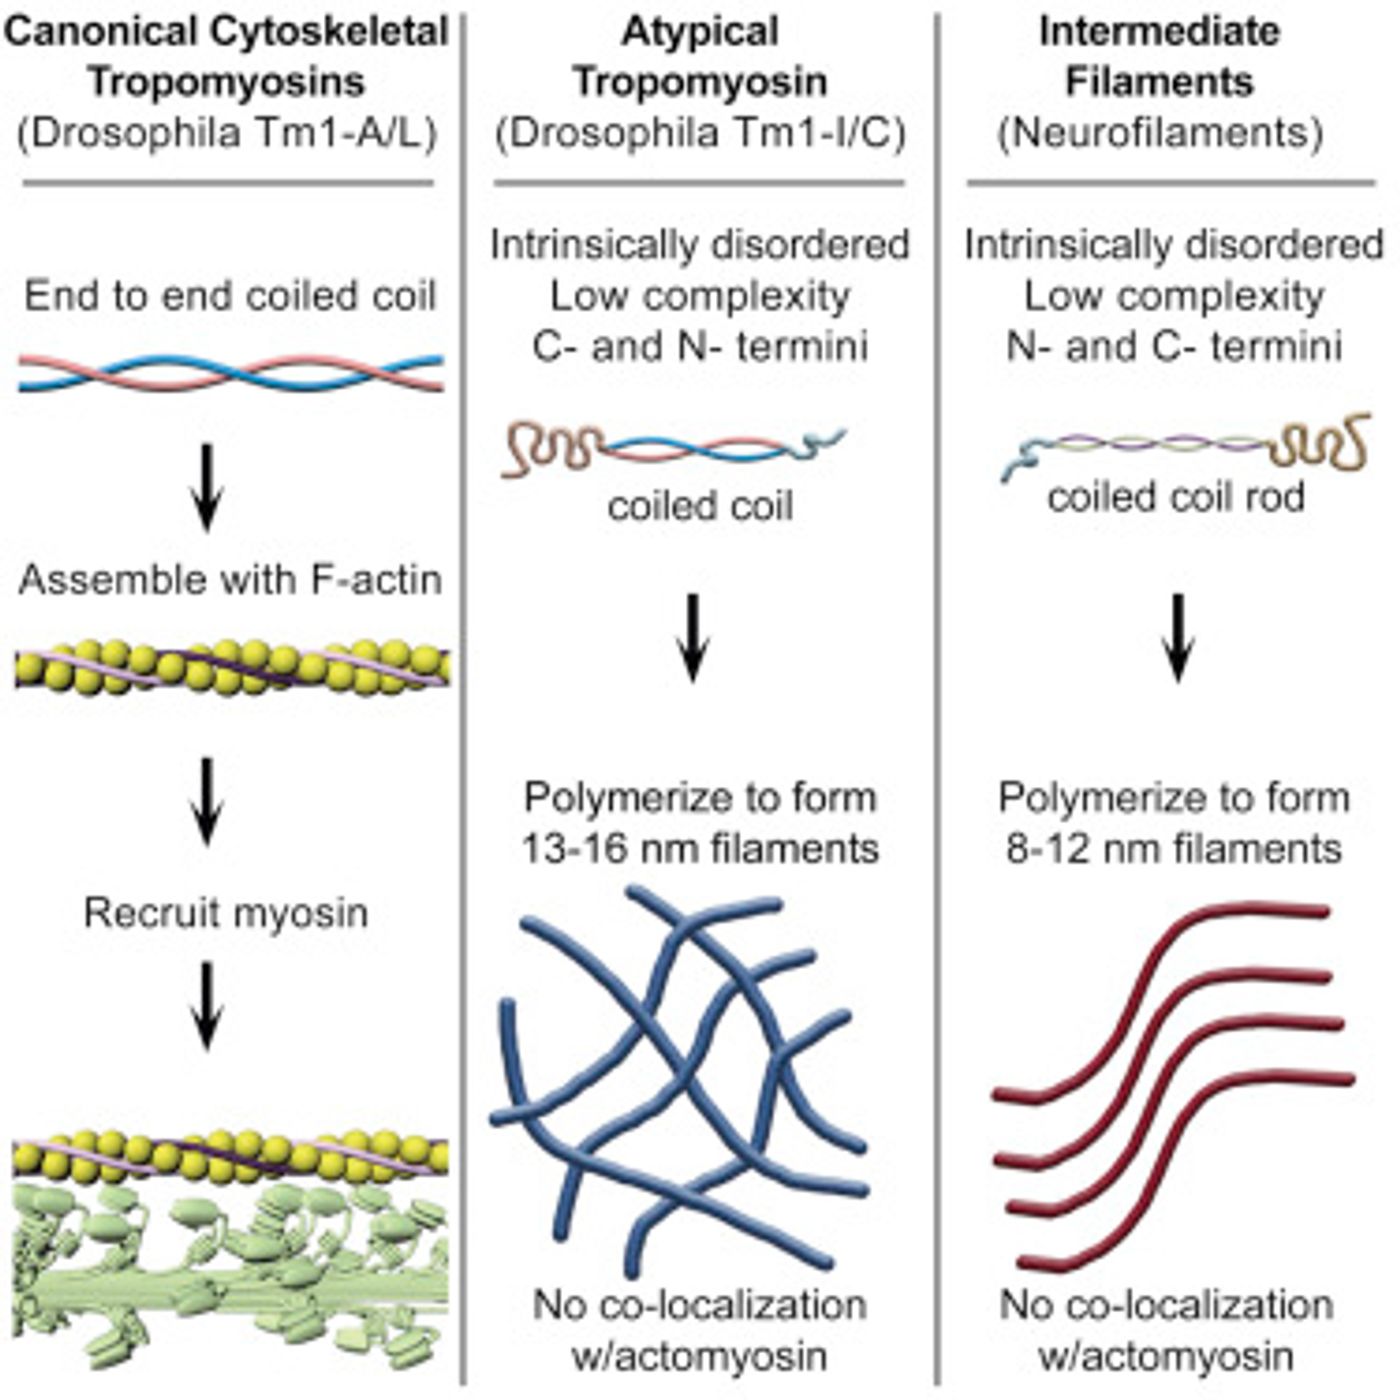 A graphical comparison of insect tropomyosins and neurofilaments